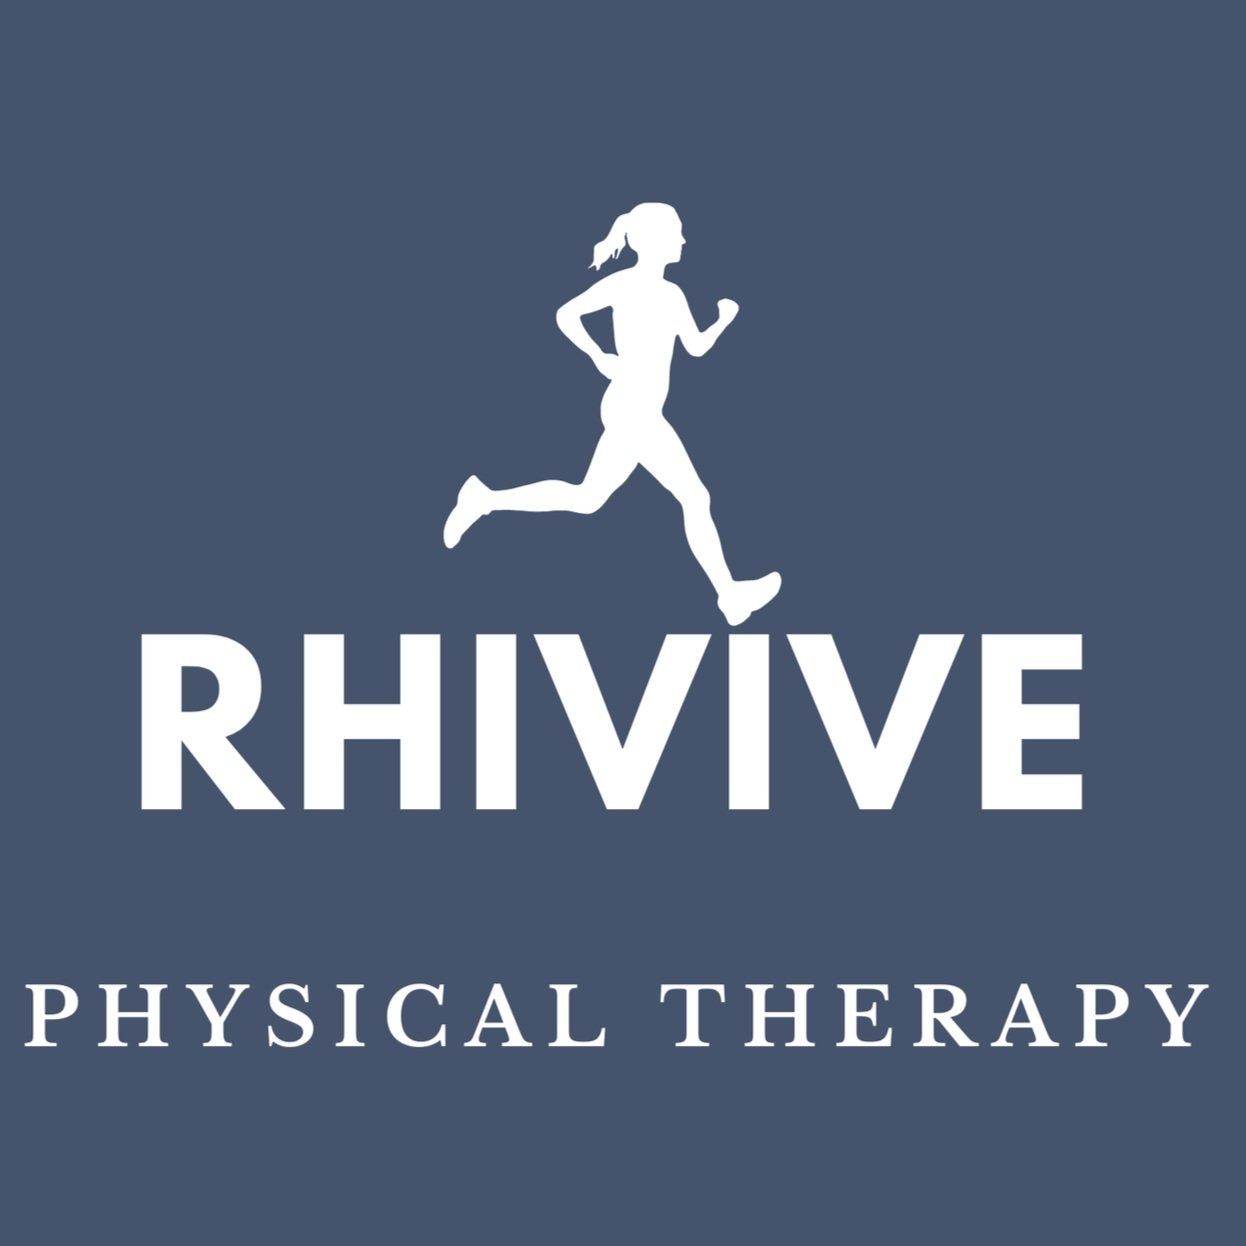 Rhivive Physical Therapy